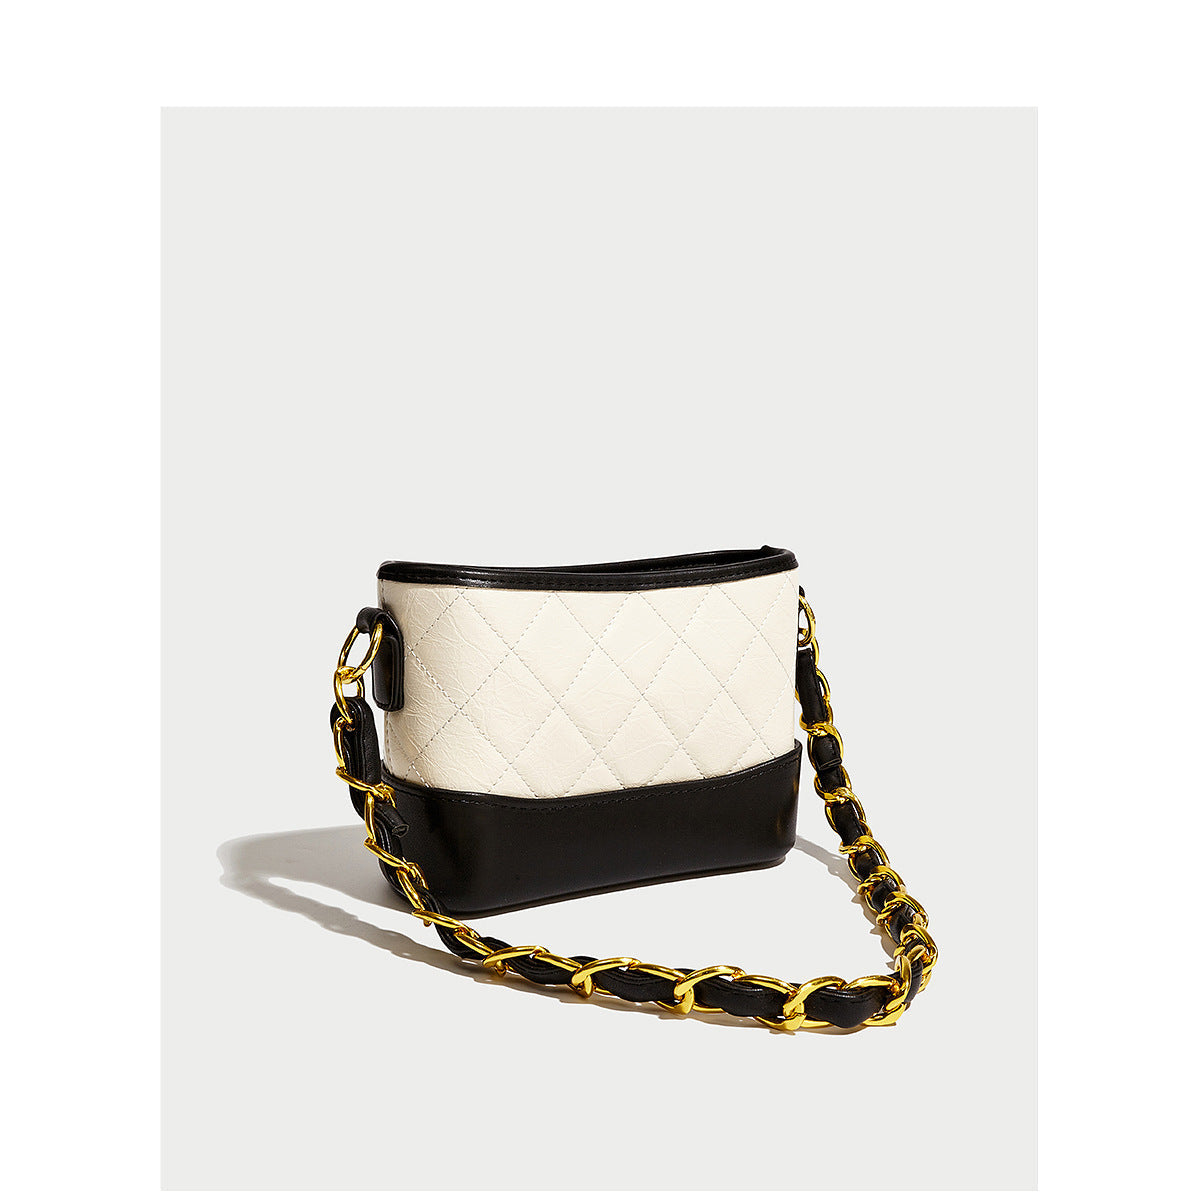 JENNIE Coco Style Chained Basket Shoulder Bag